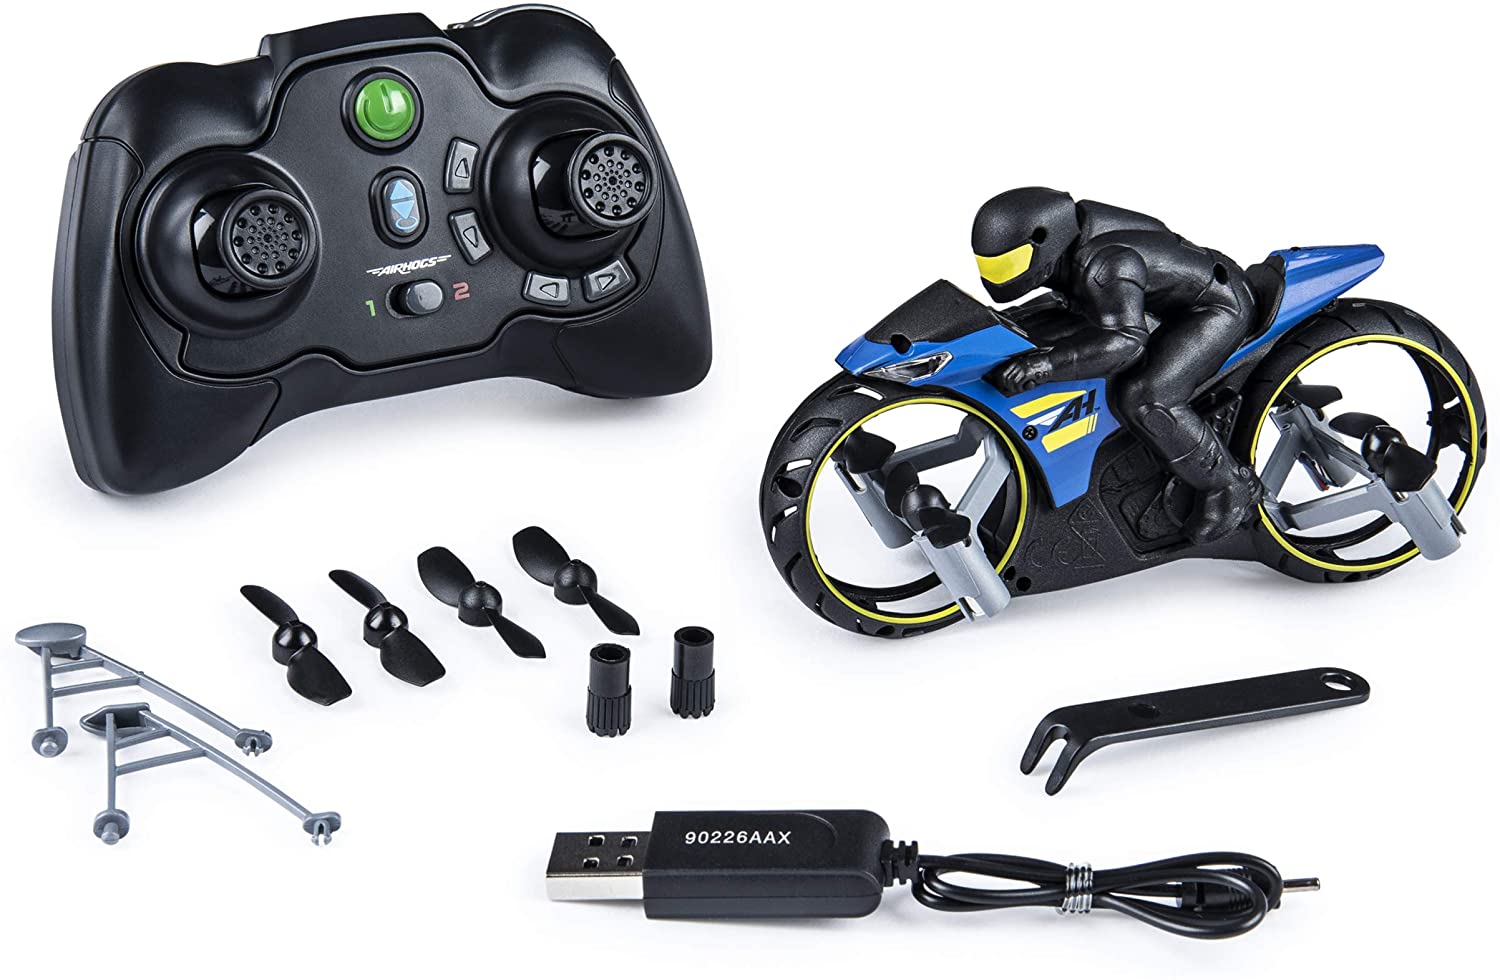 Air Hogs Flight Rider 2-in-1 Remote Control Stunt Motorcycle for Ground and Air, for Kids Ages 8+ - image 4 of 6